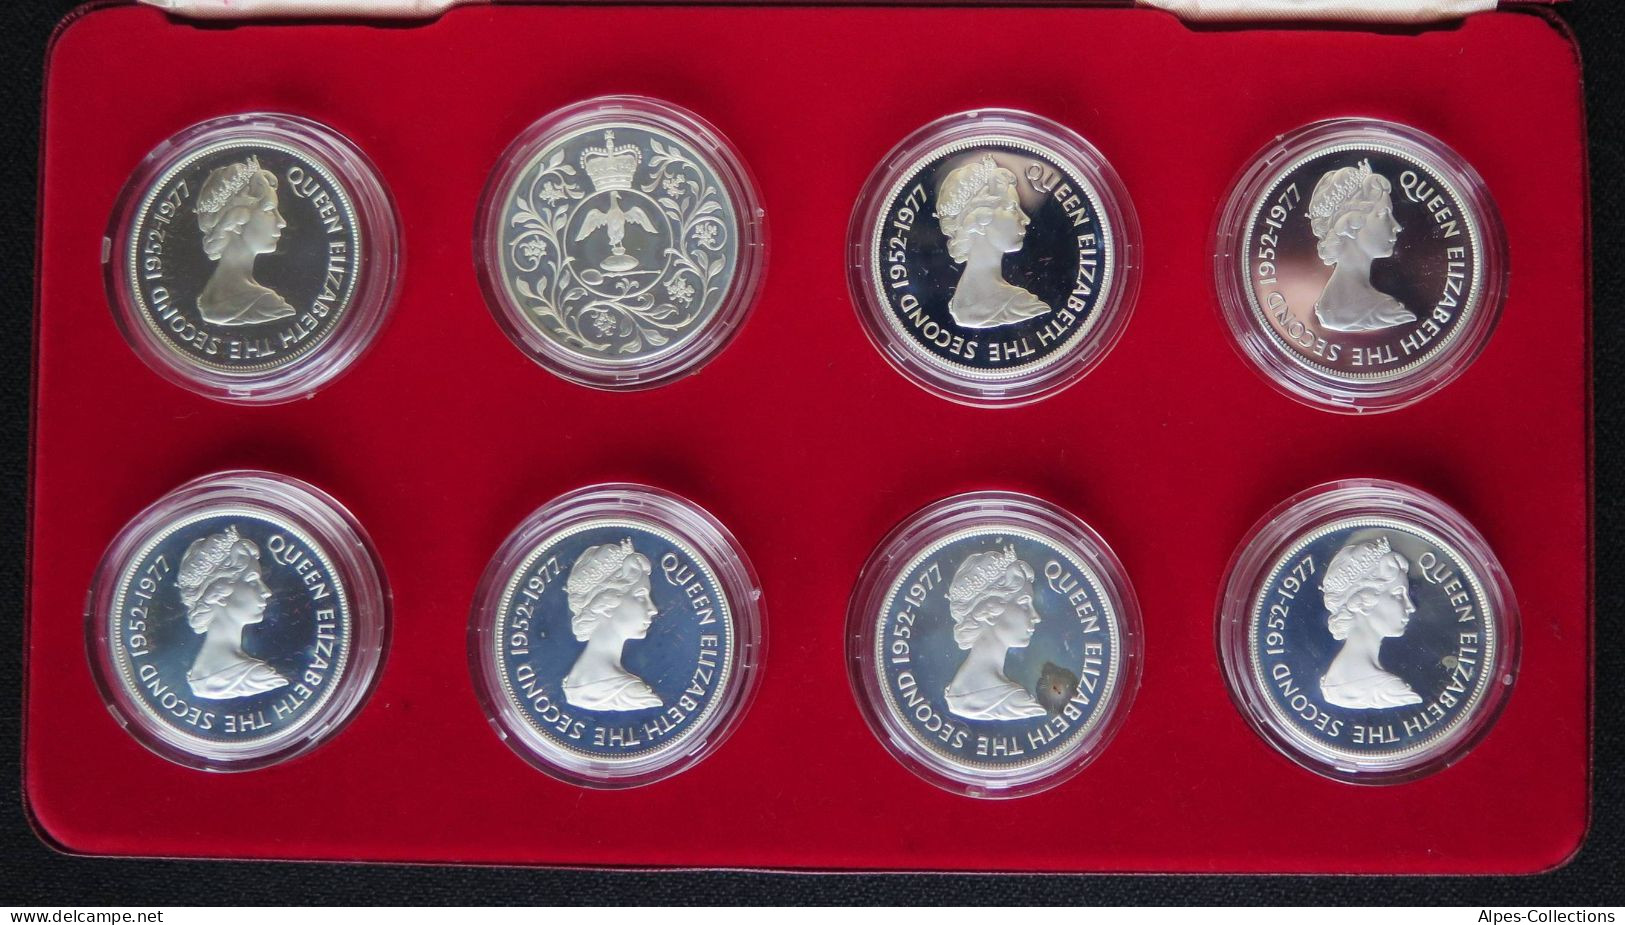 GBRX02 - ANGLETERRE - QUEEN'S SILVER JUBILEE COINS SET - 1977 - 8 Pièces - Mint Sets & Proof Sets